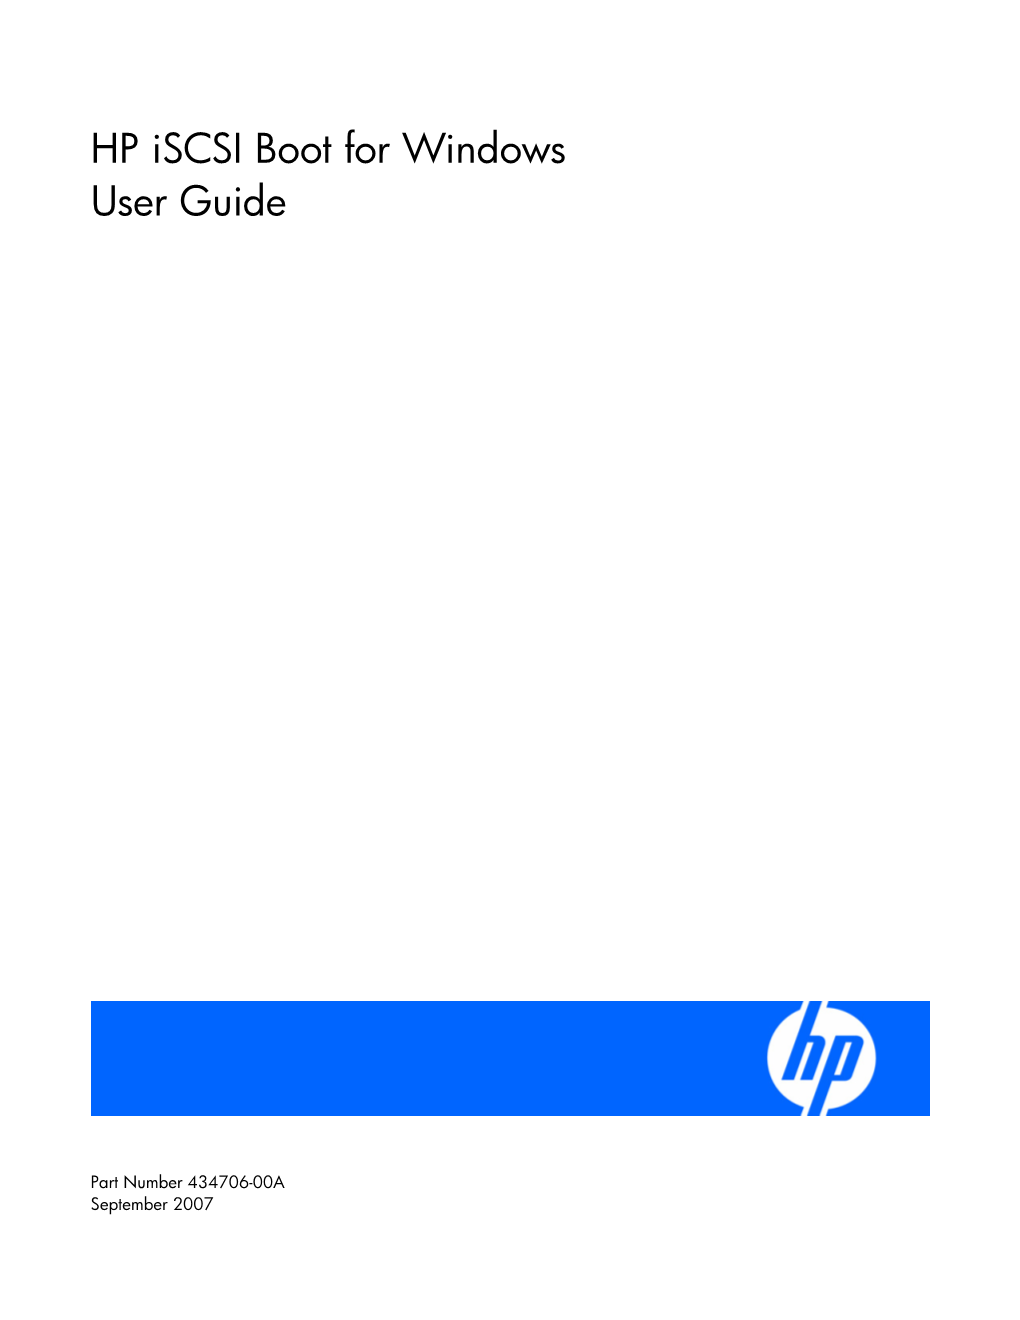 HP Iscsi Boot for Windows User Guide